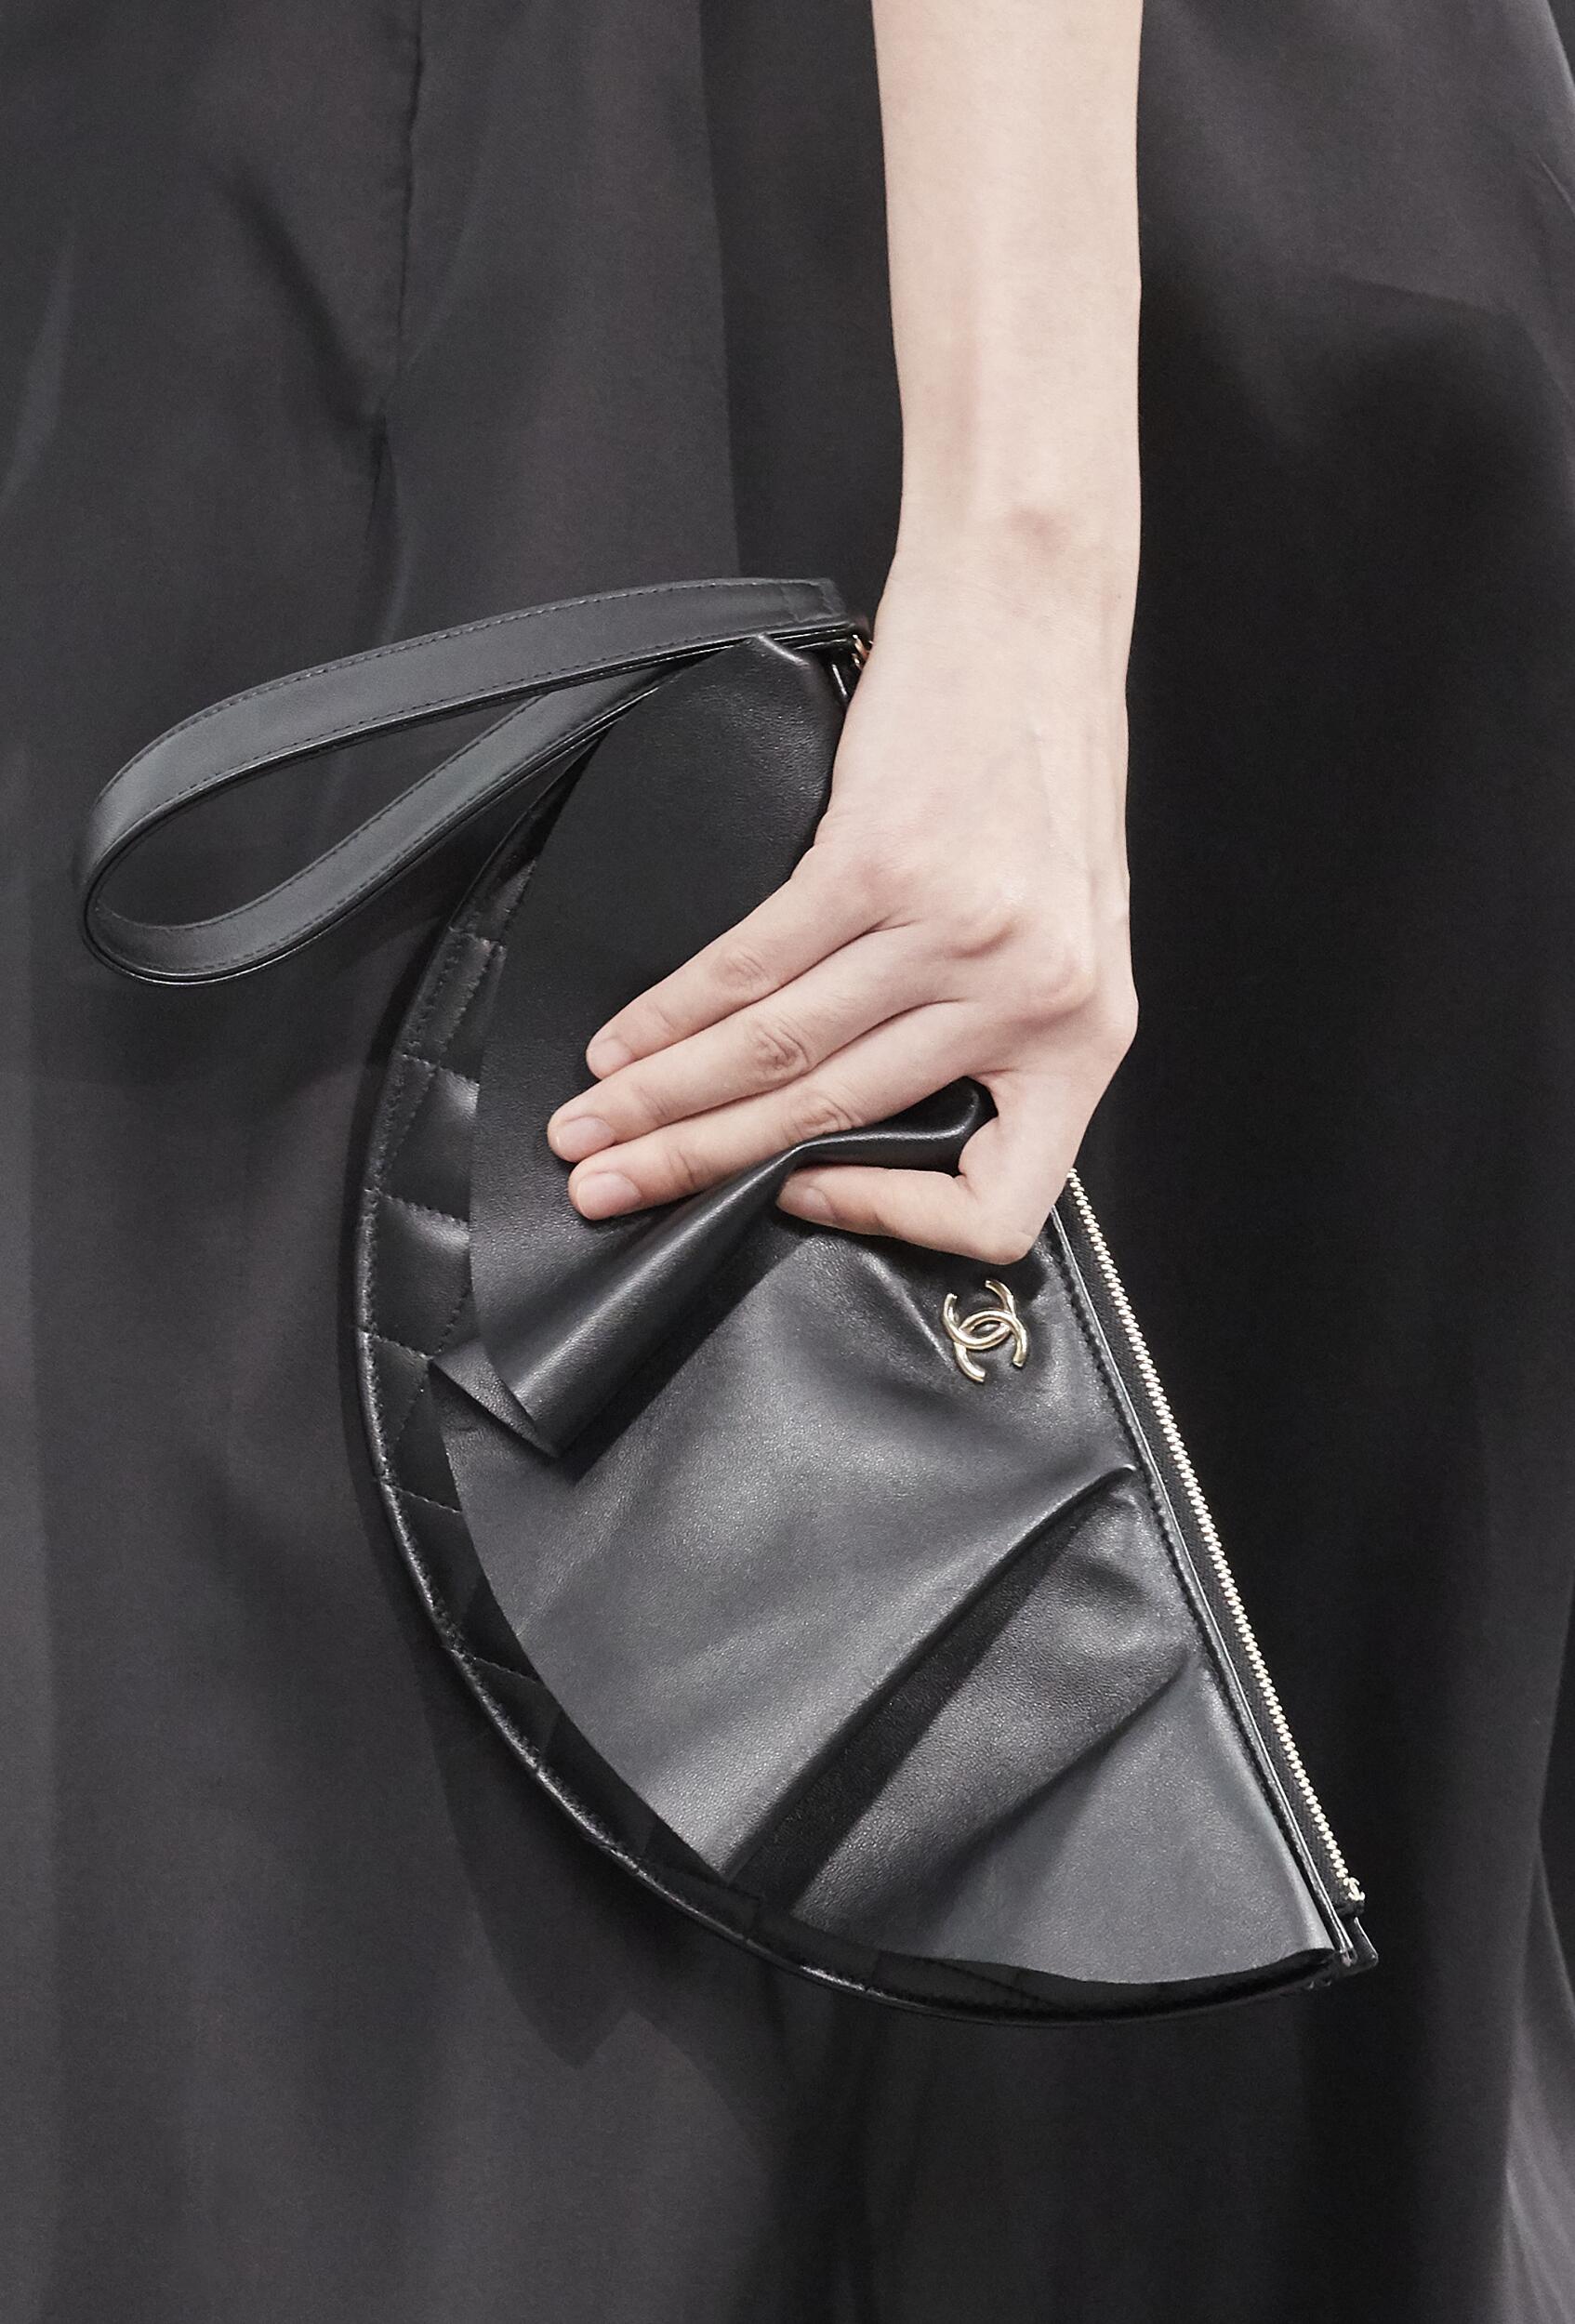 CHANEL SPRING SUMMER 2020 WOMEN’S COLLECTION DETAILS | The Skinny Beep